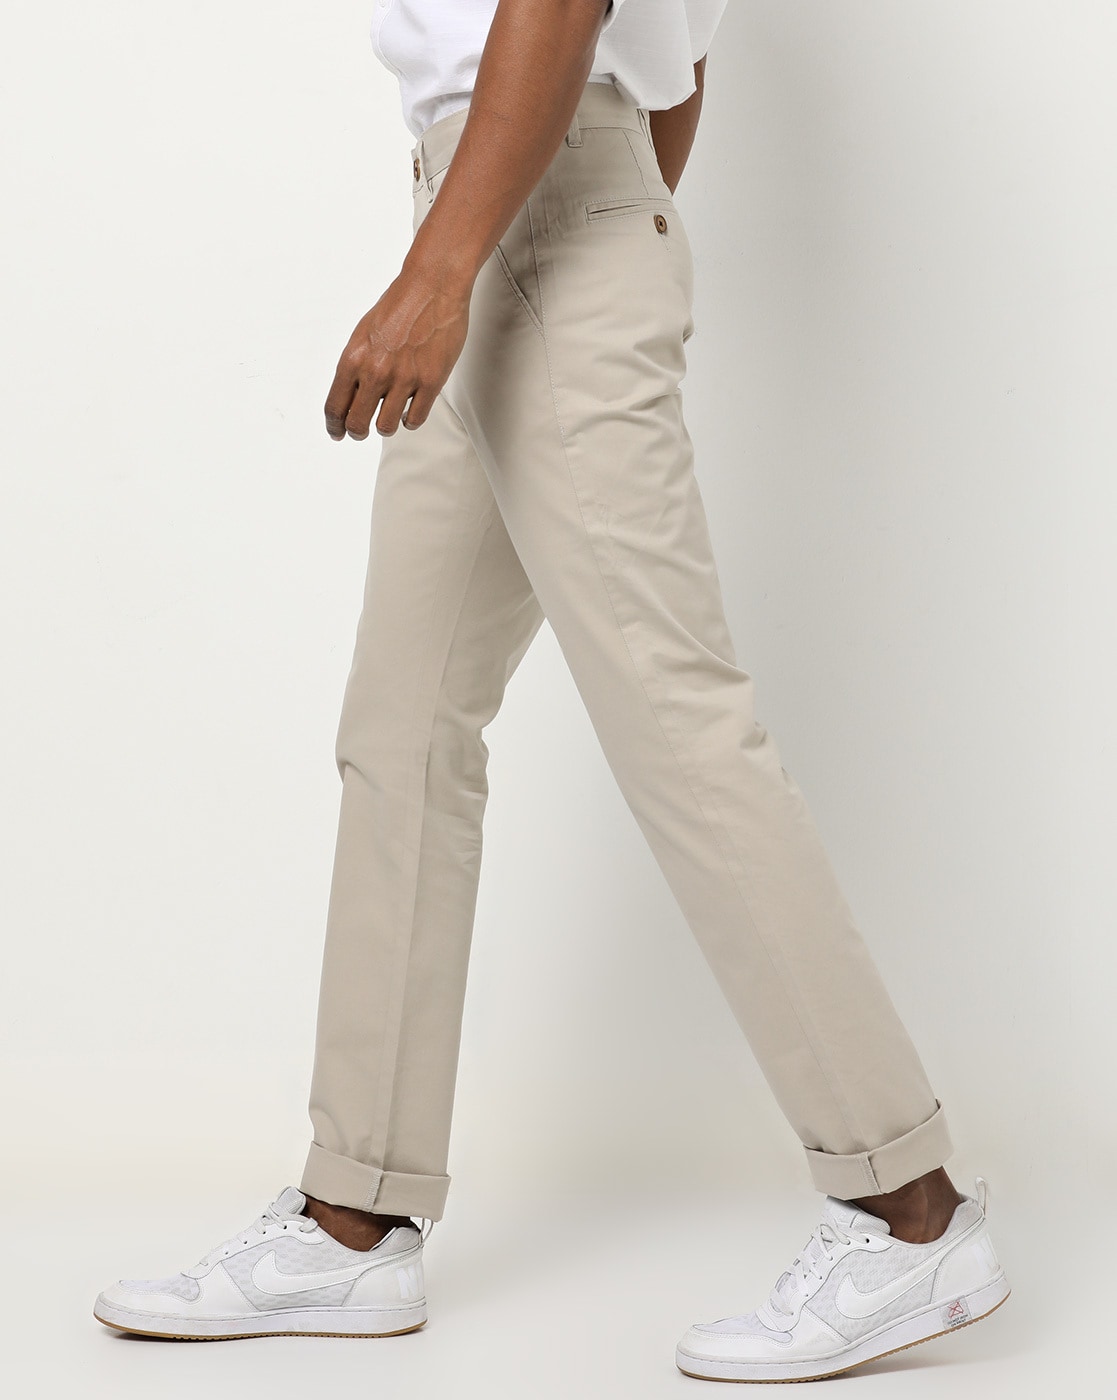 Mens Chinos  Cuffed Skinny  Tapered Chino Pants  Connor New Zealand